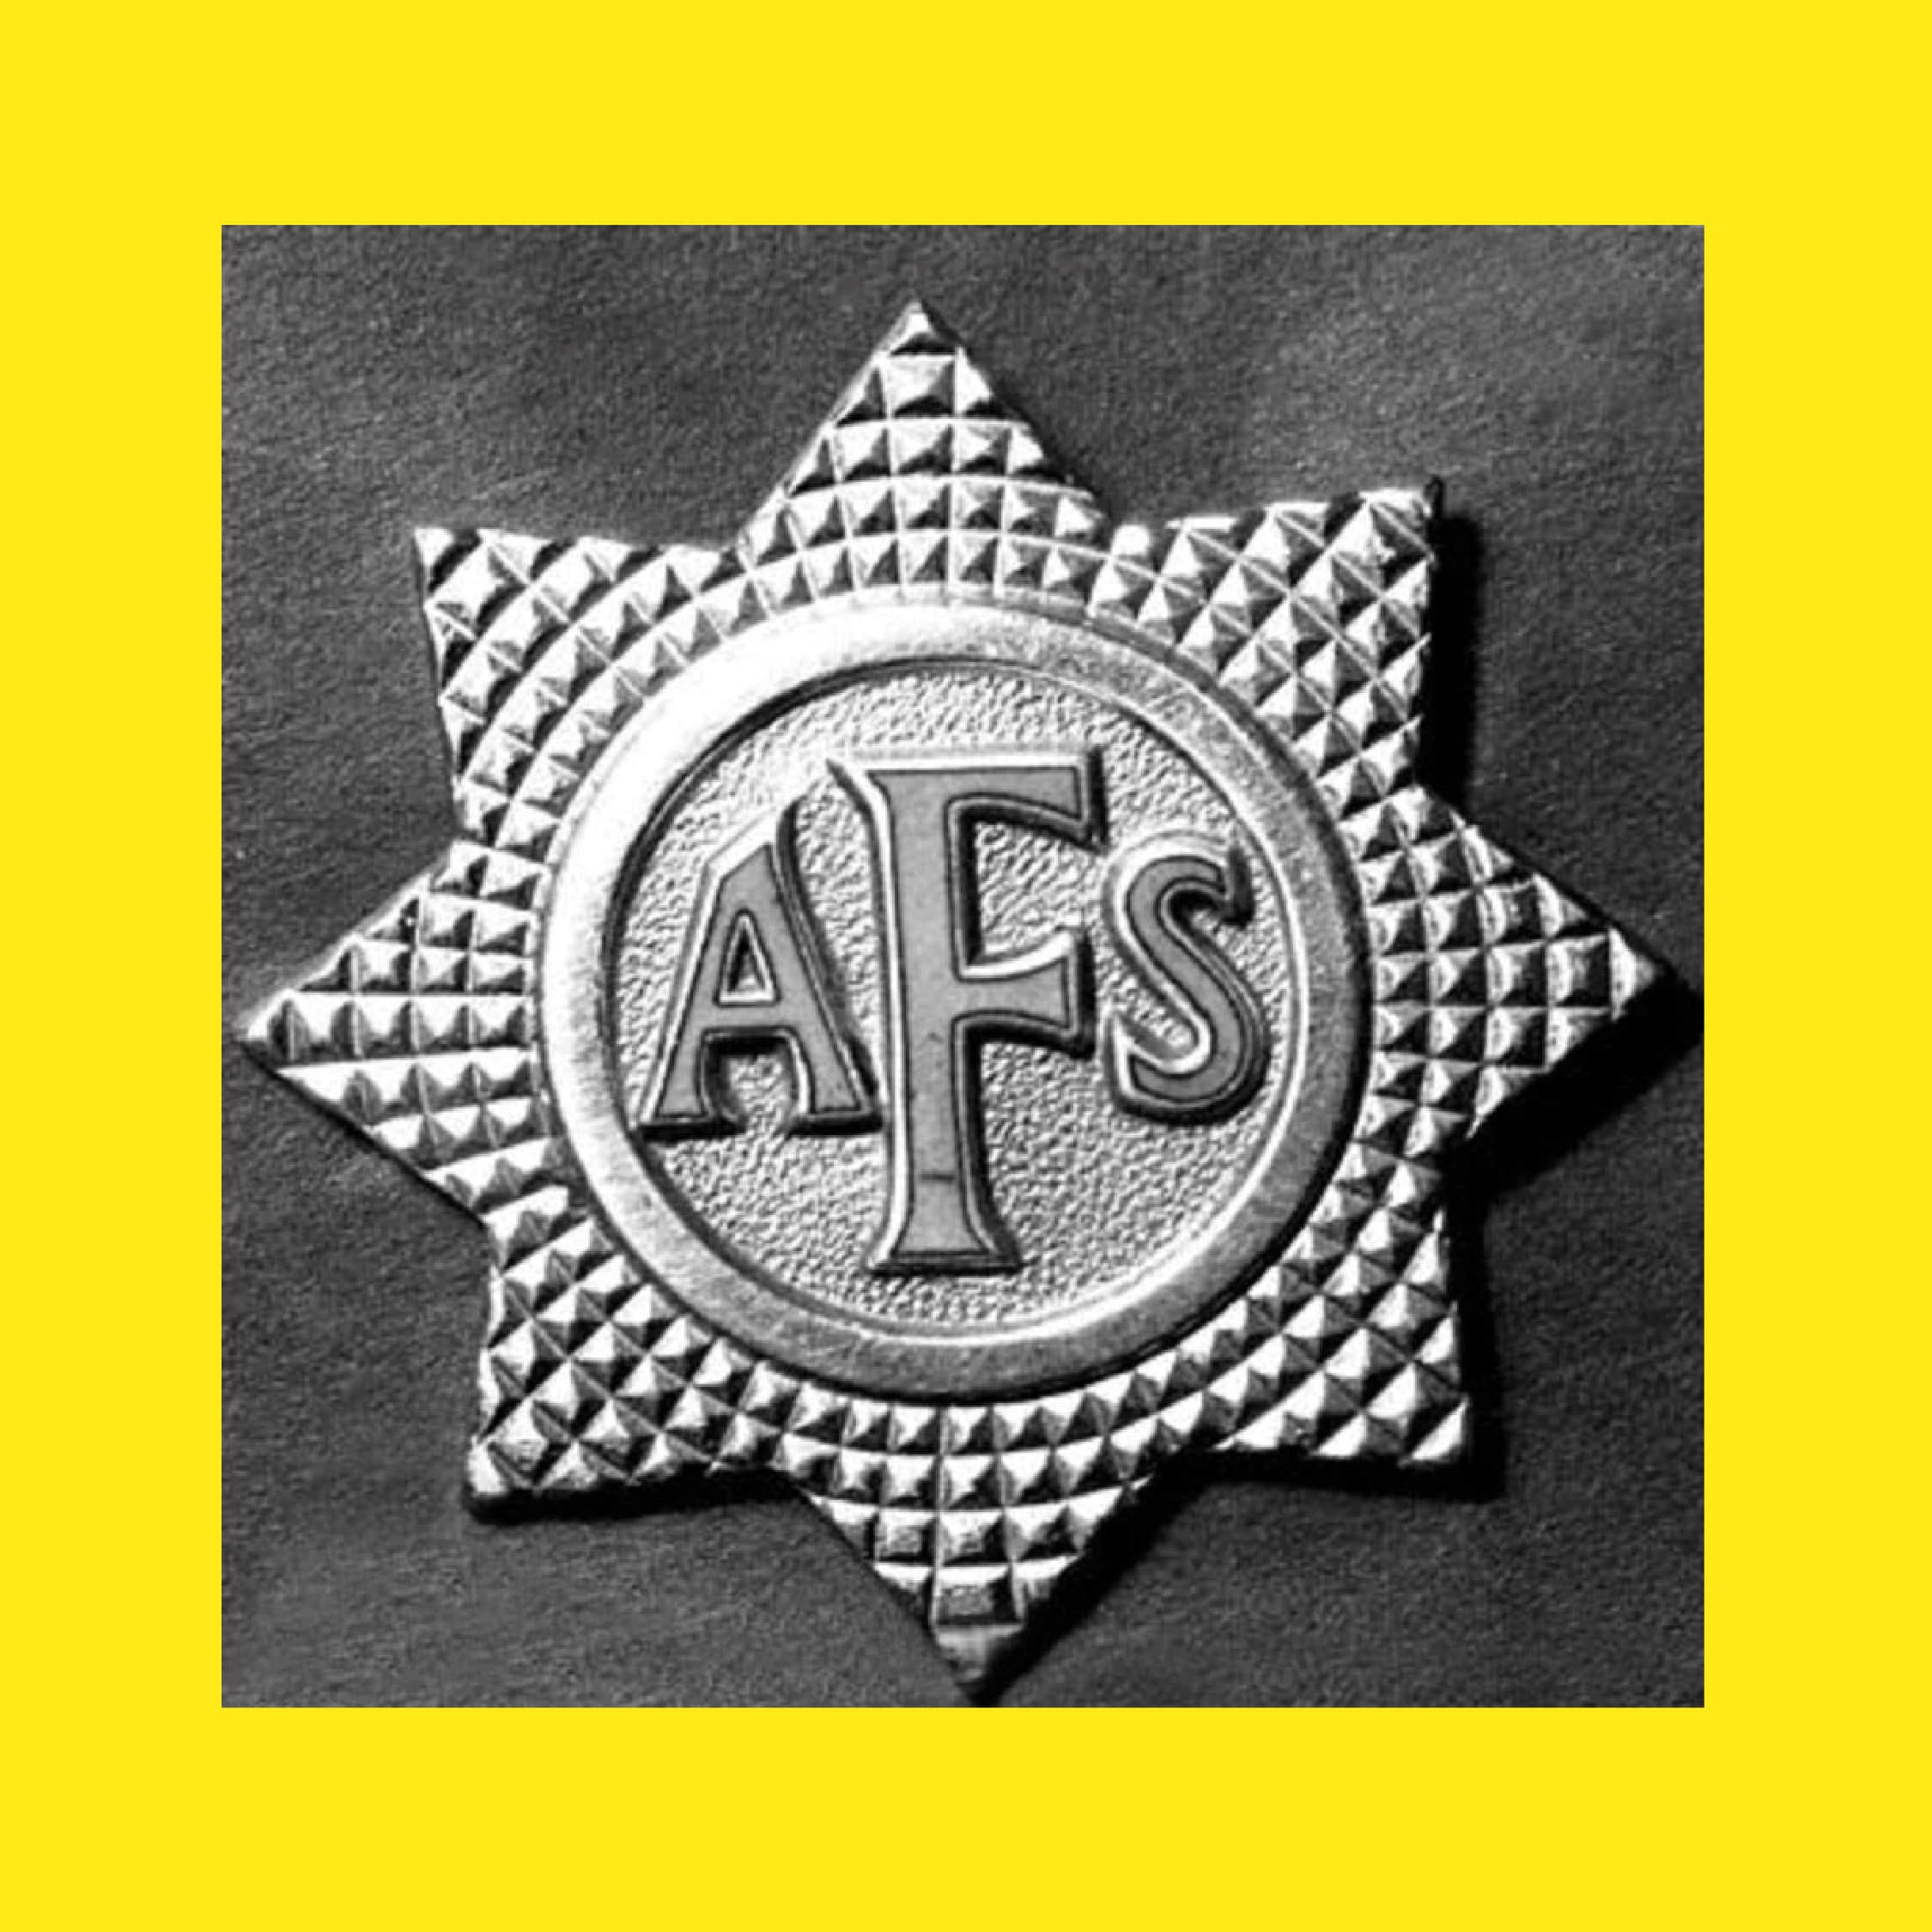 Auxiliary Fire Service badge from World War II